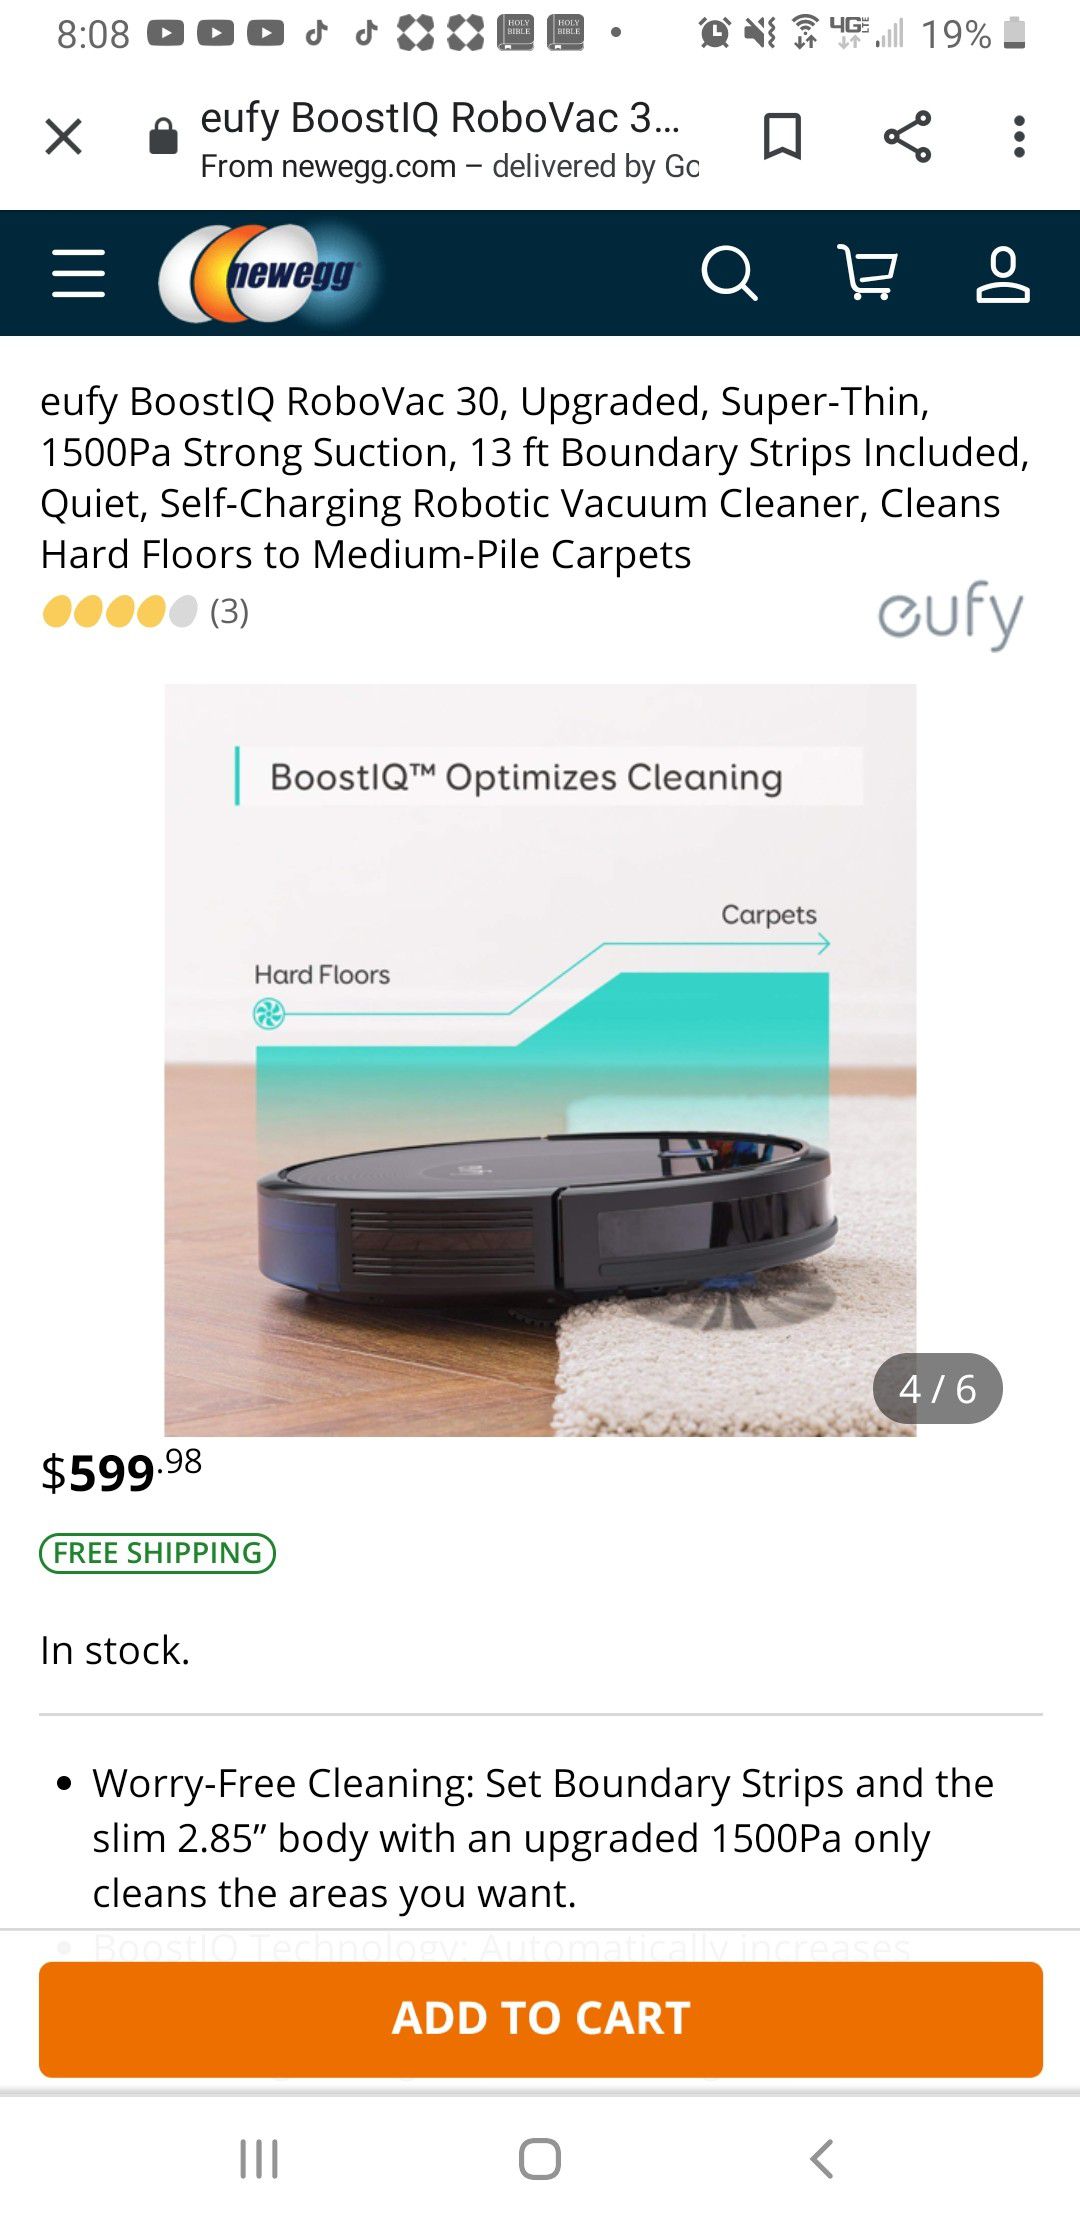 Eufy BoostIQ RoboVac 30, upgraded, super thin, strong suction